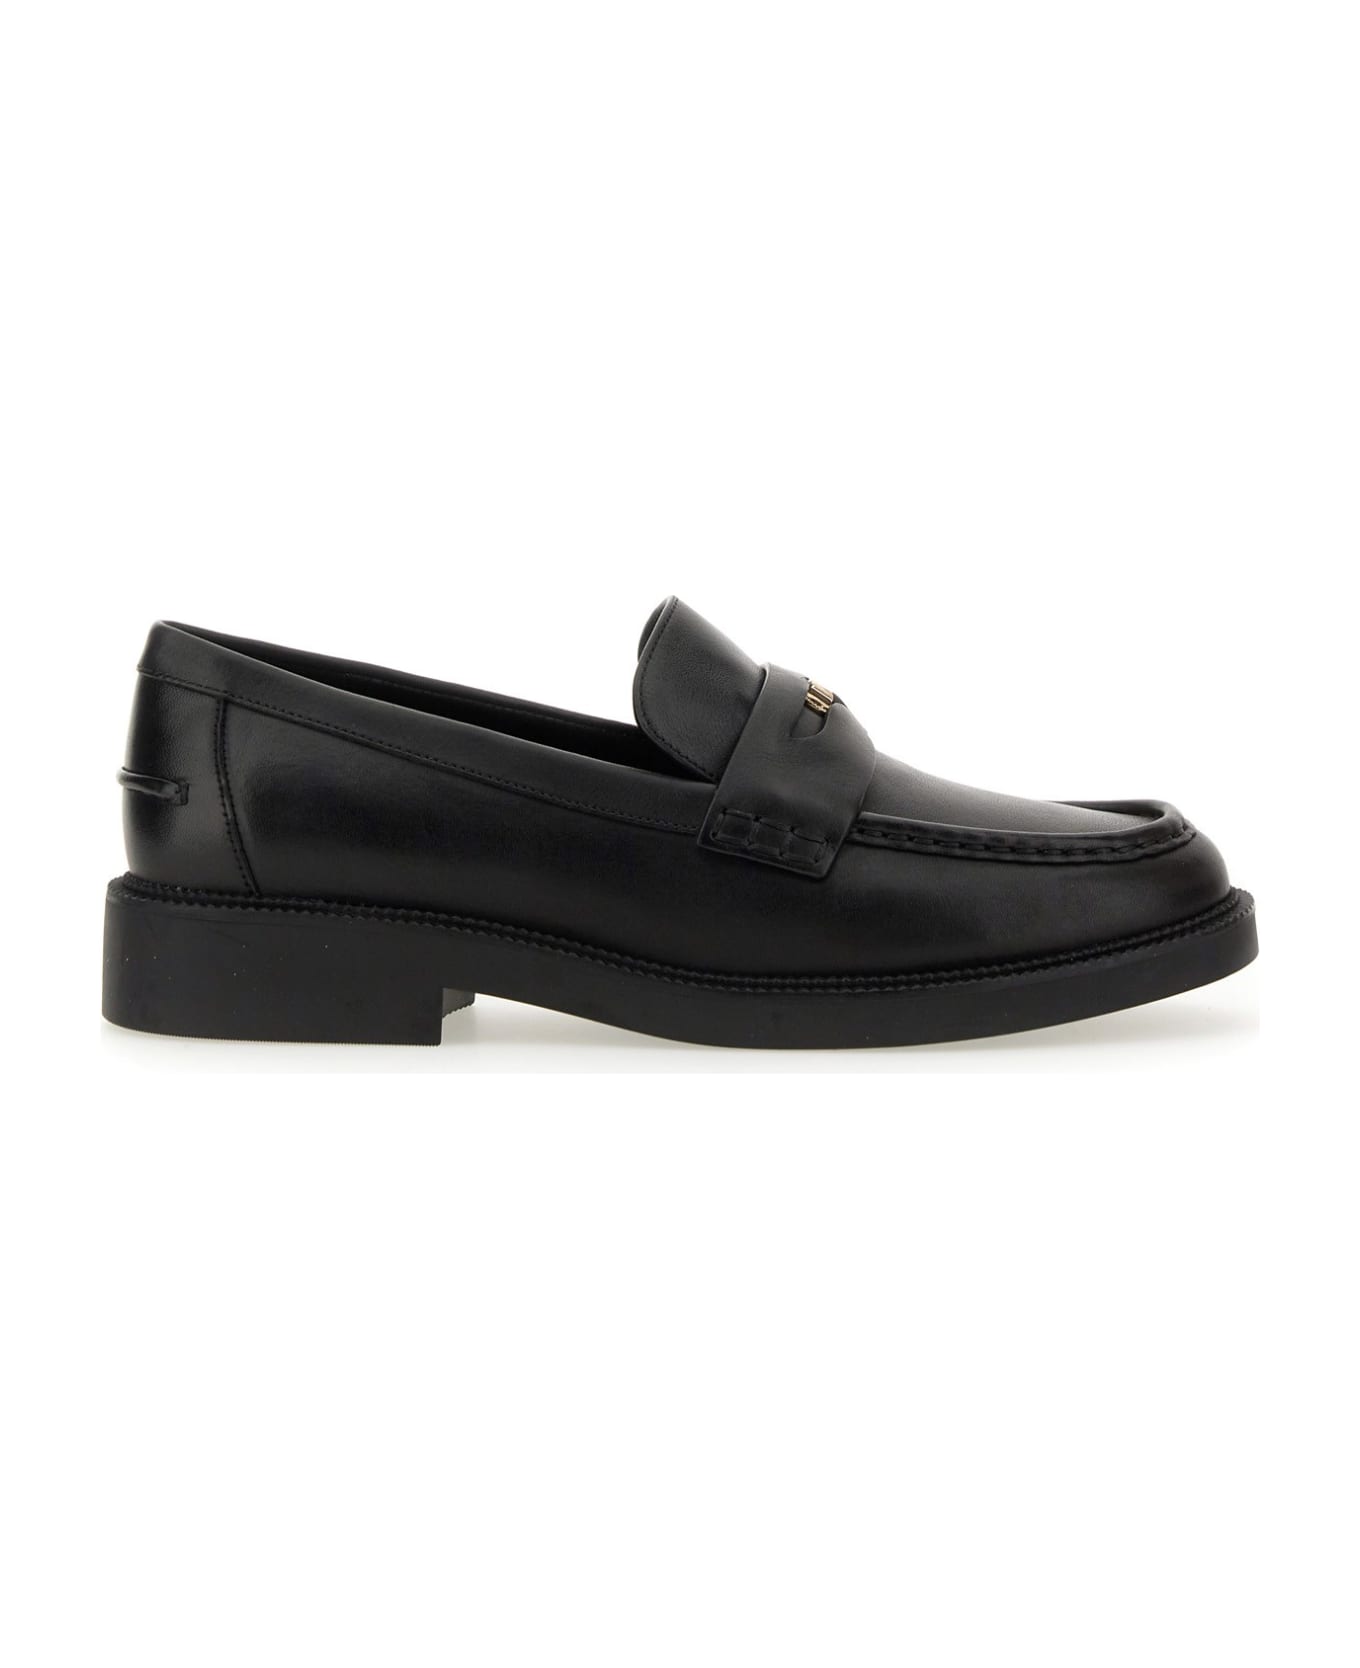 MICHAEL Michael Kors Loafer With Coin - NERO フラットシューズ